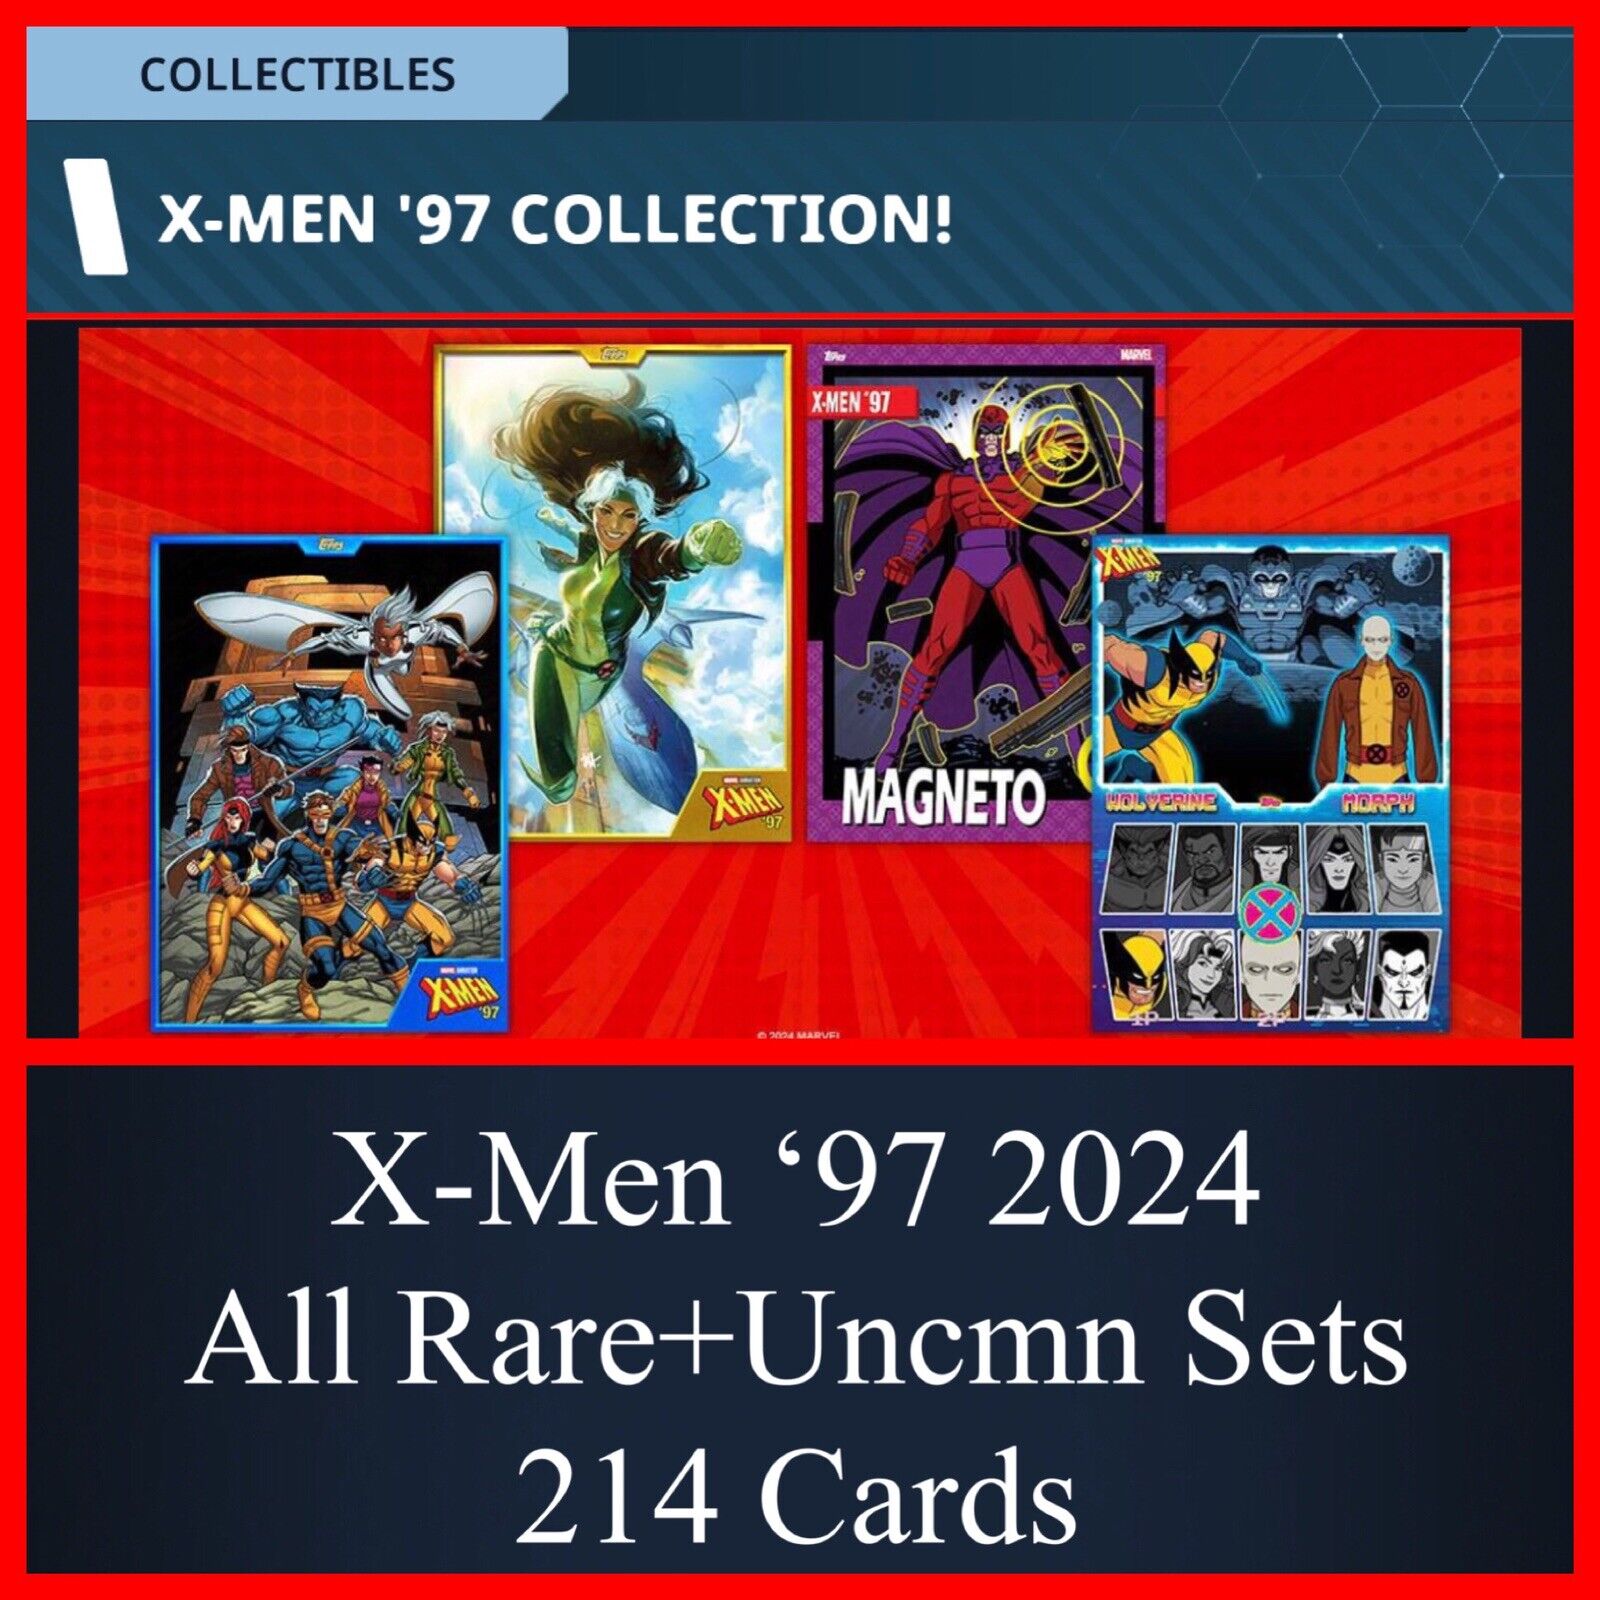 X-MEN ‘97 2024-ALL RARE+UNCOMMON 214 CARD SET-TOPPS MARVEL COLLECT DIGITAL